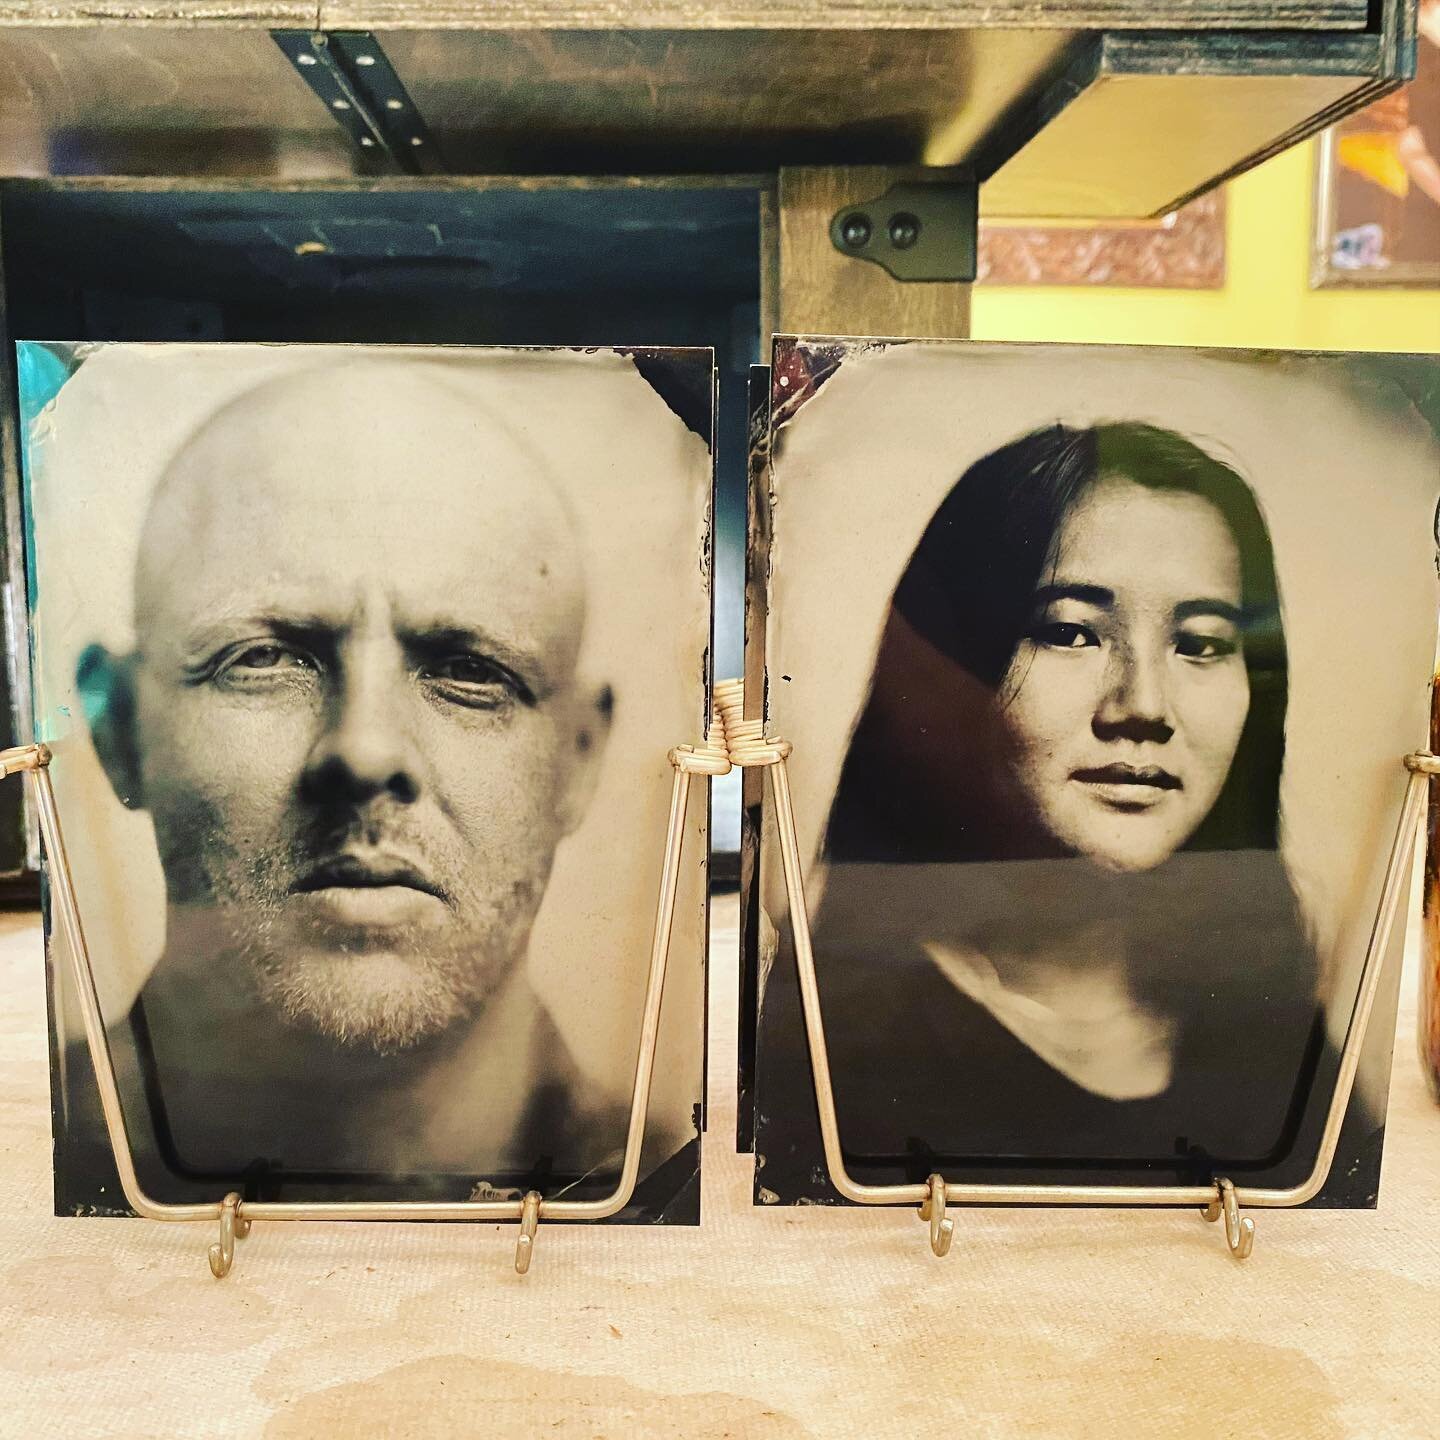 Varnishing some plates that I shot with my new lens. #dallmeyer3b  What do you think of the lighting?
#nyctintype #wetplate #tintype.